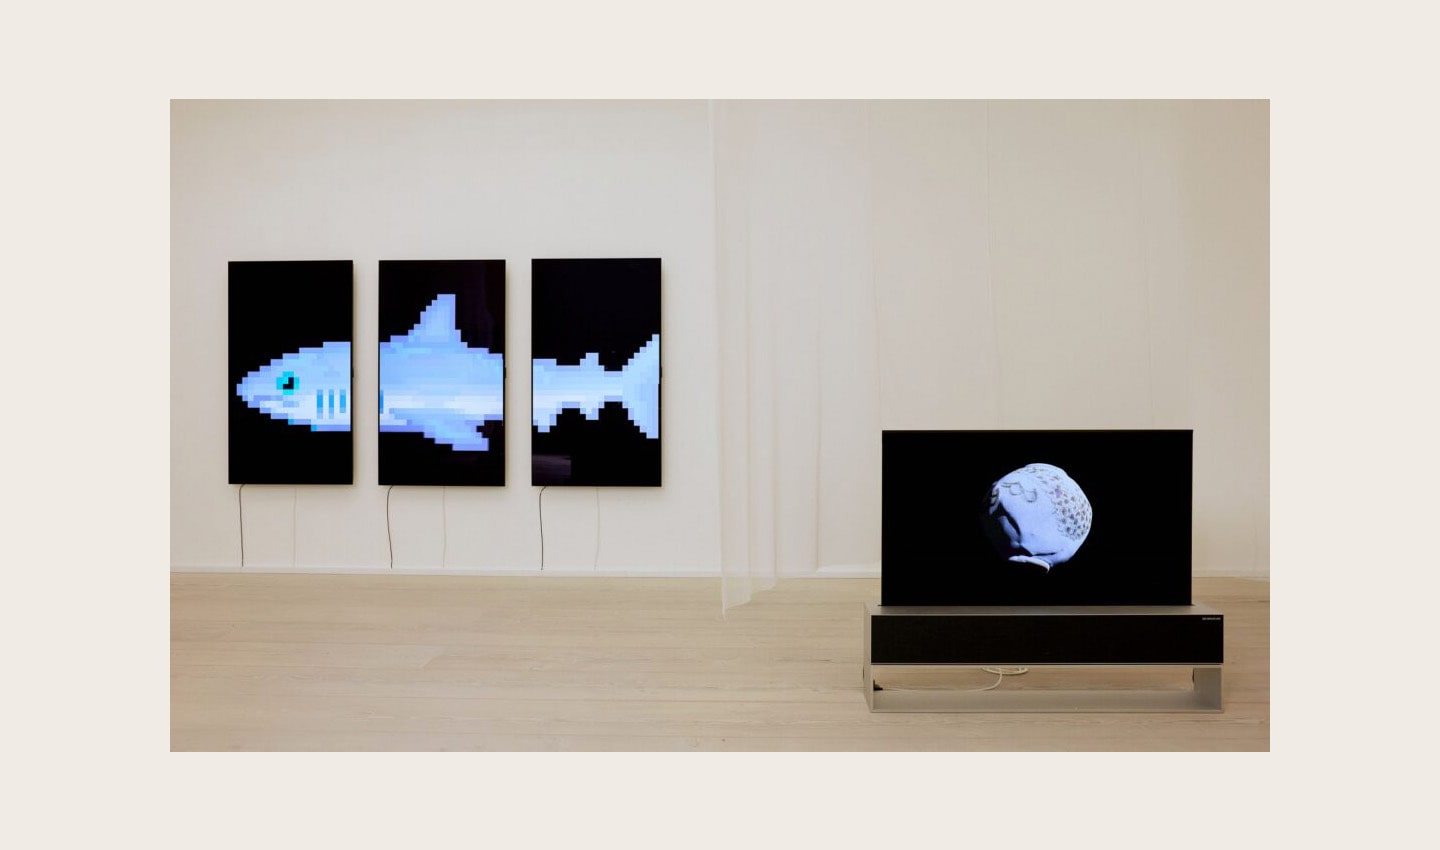 From left, ‘THE S/H/A/R/K’ by Damien Hirst and ‘The Moment & Morpho Luna’ by Je Baak displayed side by side